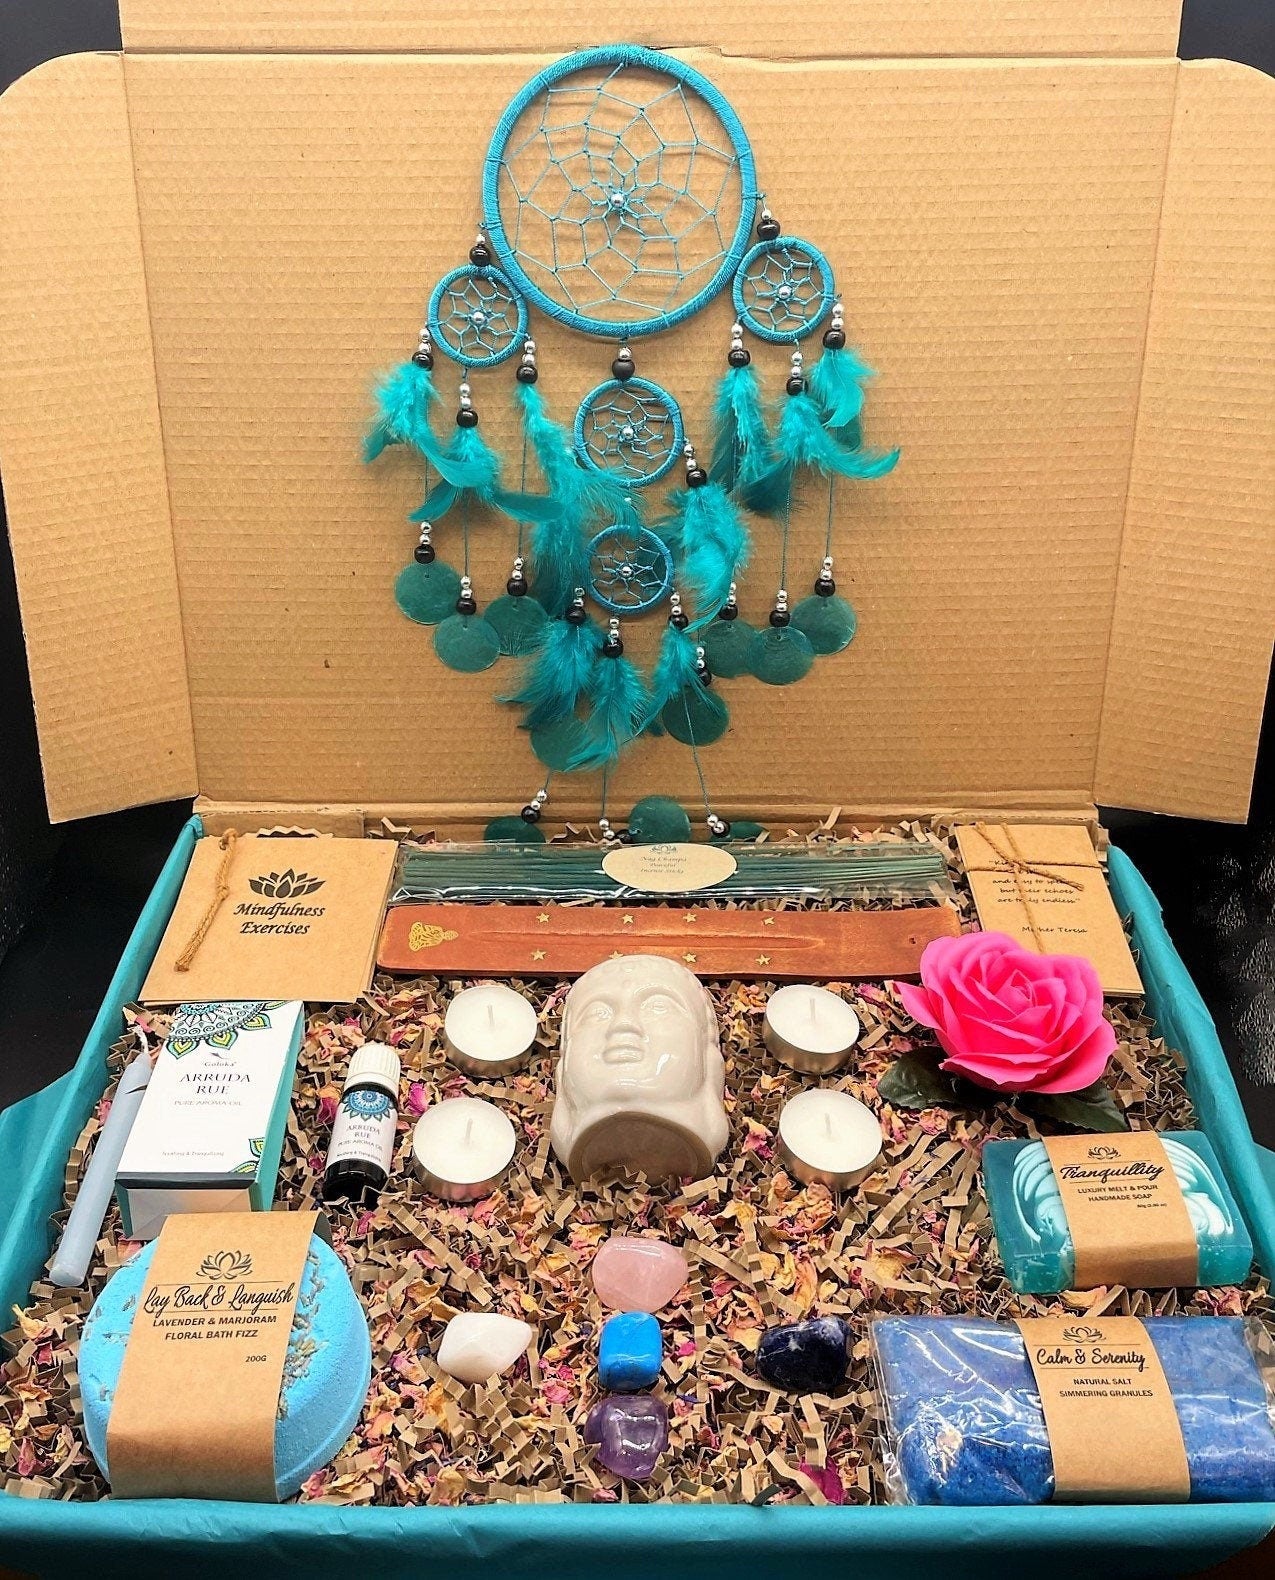 Complete Wellbeing & Tranquillity Gift Box, Wellness, Mindfulness, Self Care Hamper, Calming, Dreamcatcher, Healing Crystals, Christmas Gift